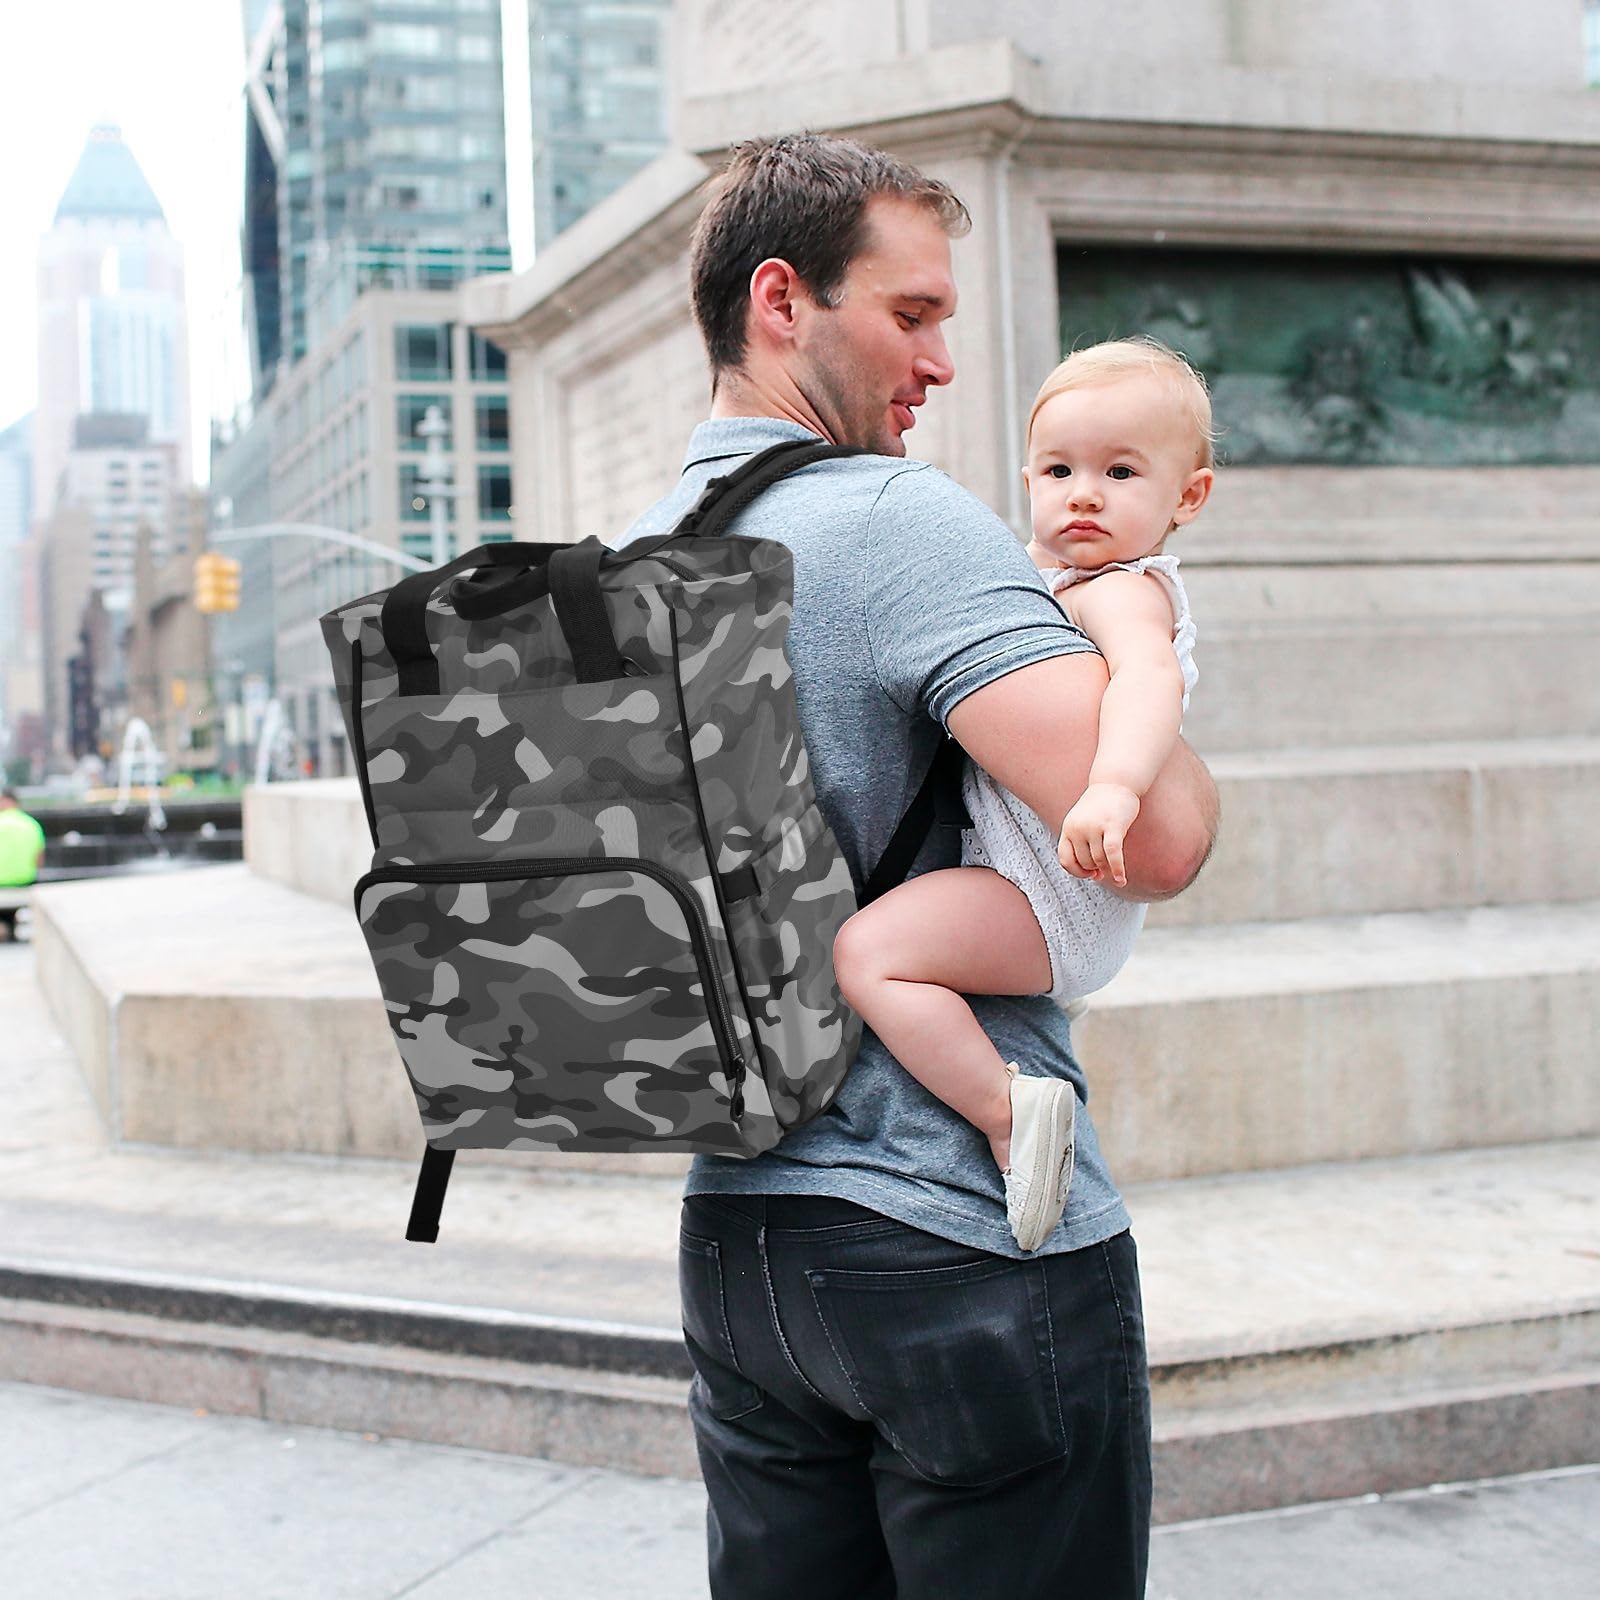 innewgogo Gray Classic Camouflage Diaper Bag Backpack for Women Men Large Capacity Baby Changing Totes with Three Pockets Multifunction Baby Nappy Bag for Playing Picnicking